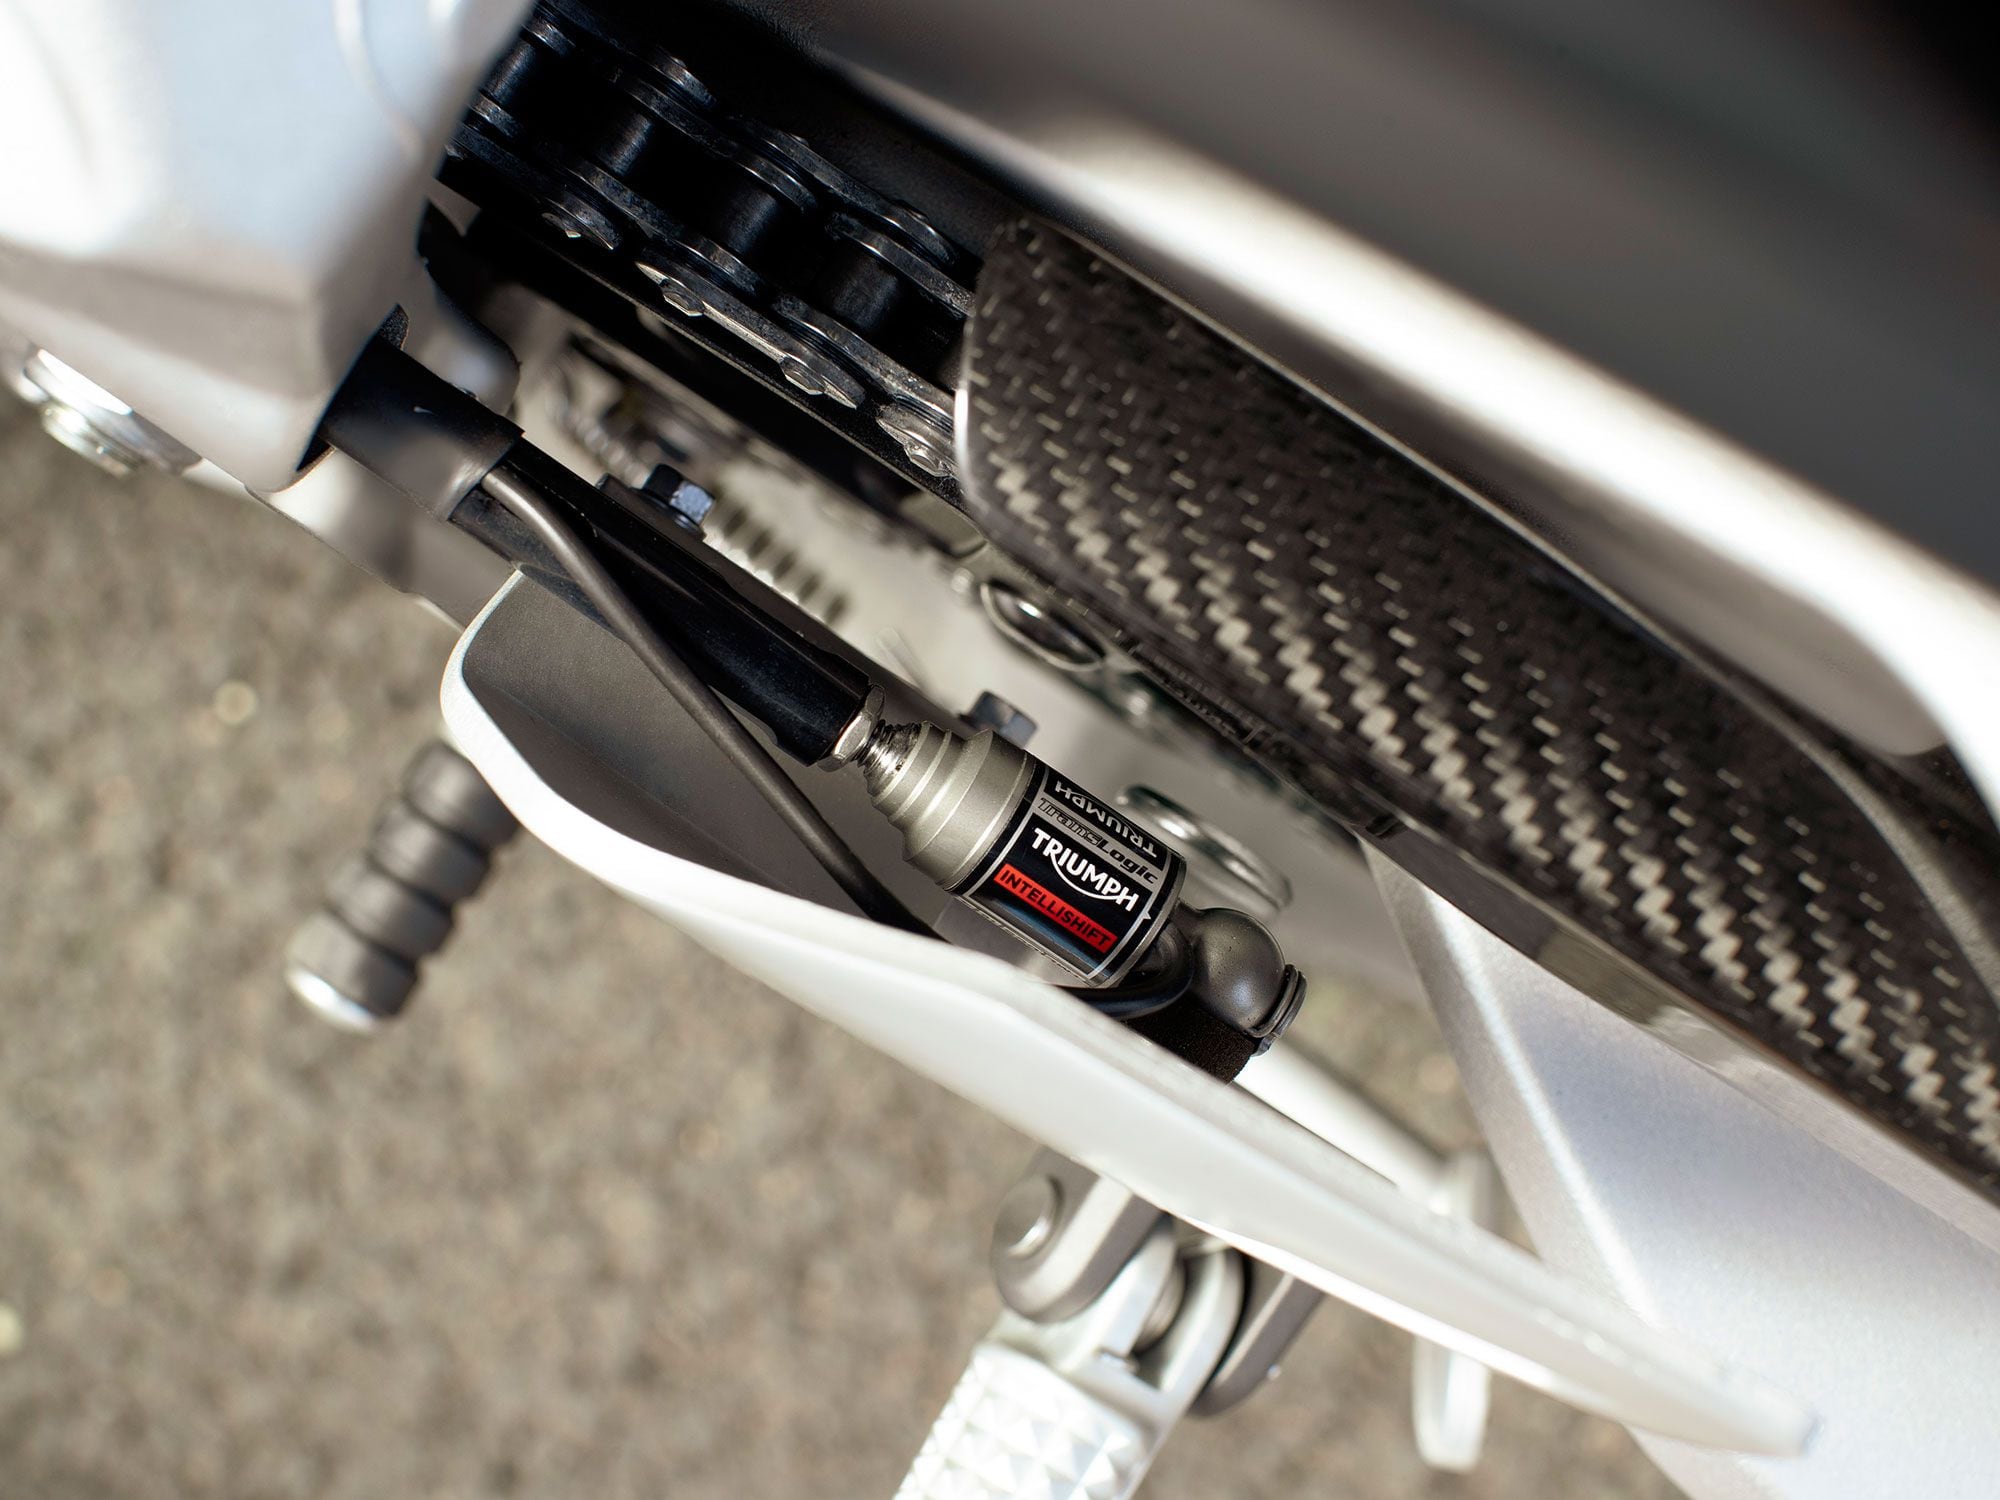 An electronic up-and-down quickshifter makes it easy to keep the 765cc engine in the meat of its powerband. We also value the added stability it offers during corner entry.